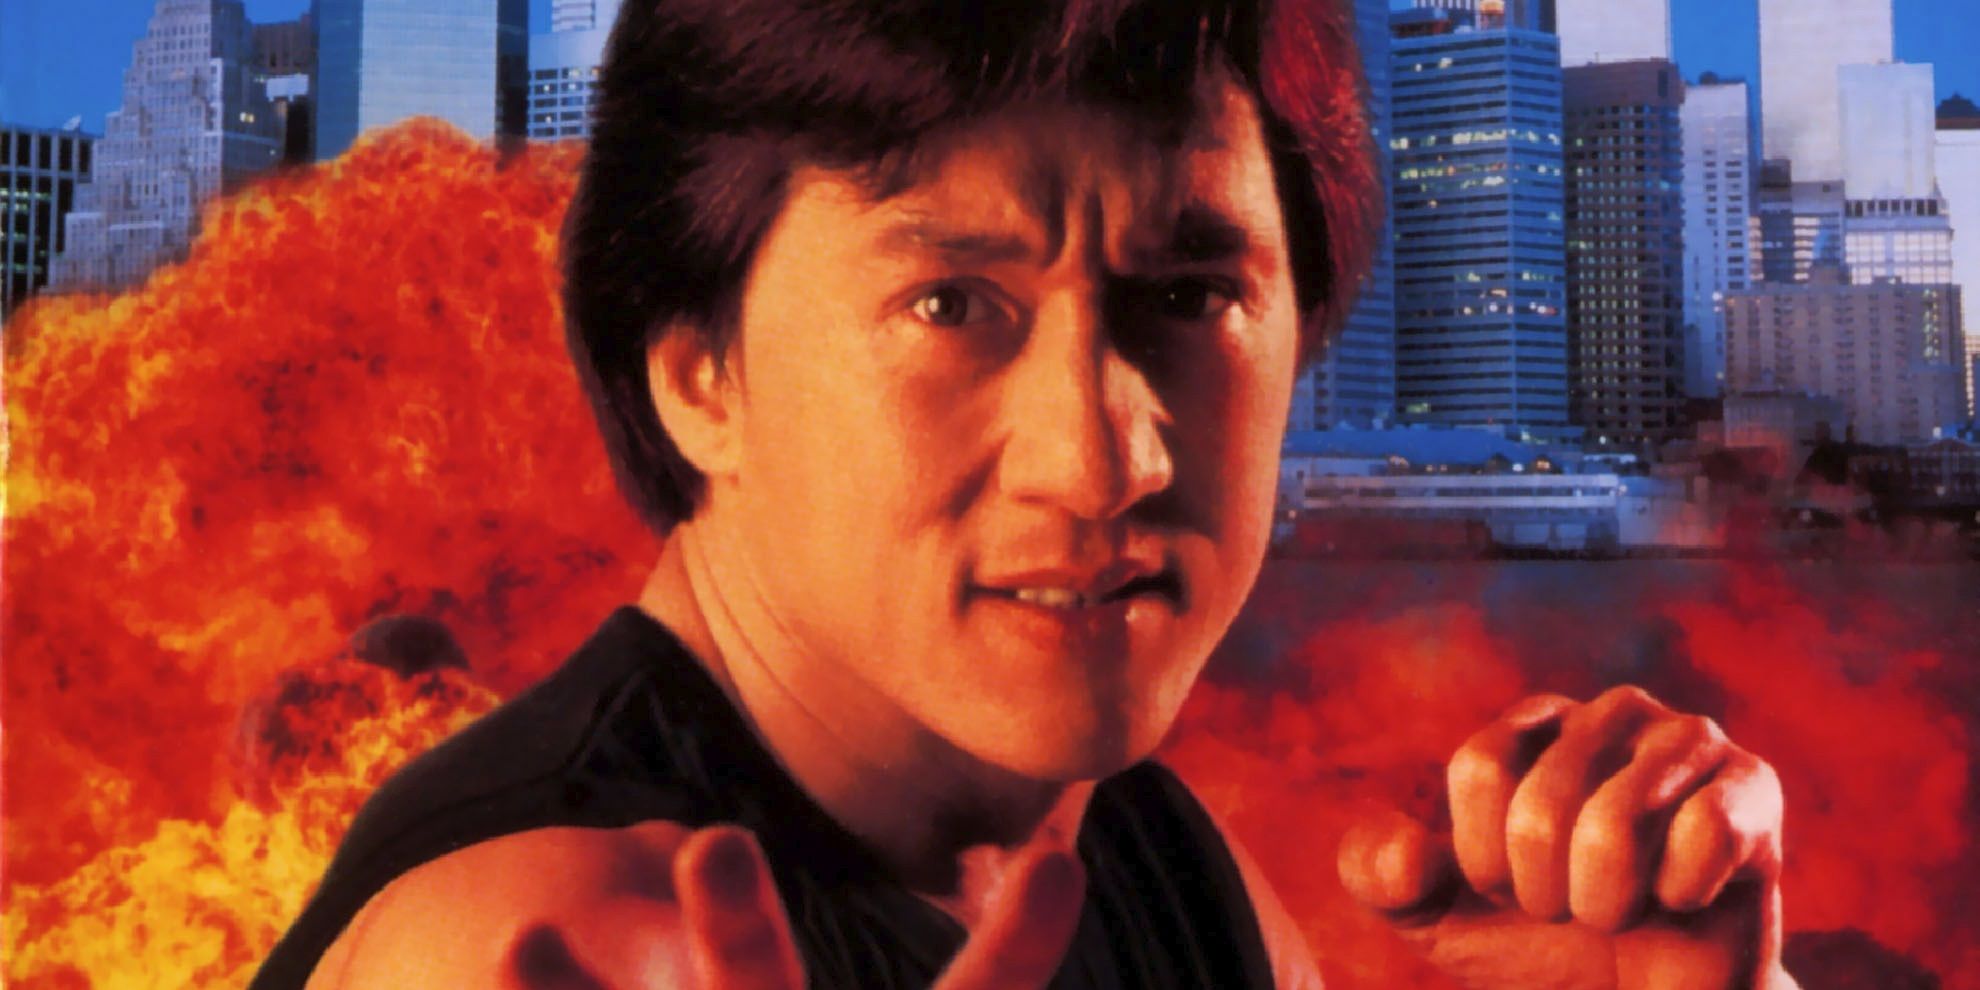 Rumble in the Bronx Jackie Chan in front of an explosion from the movie poster